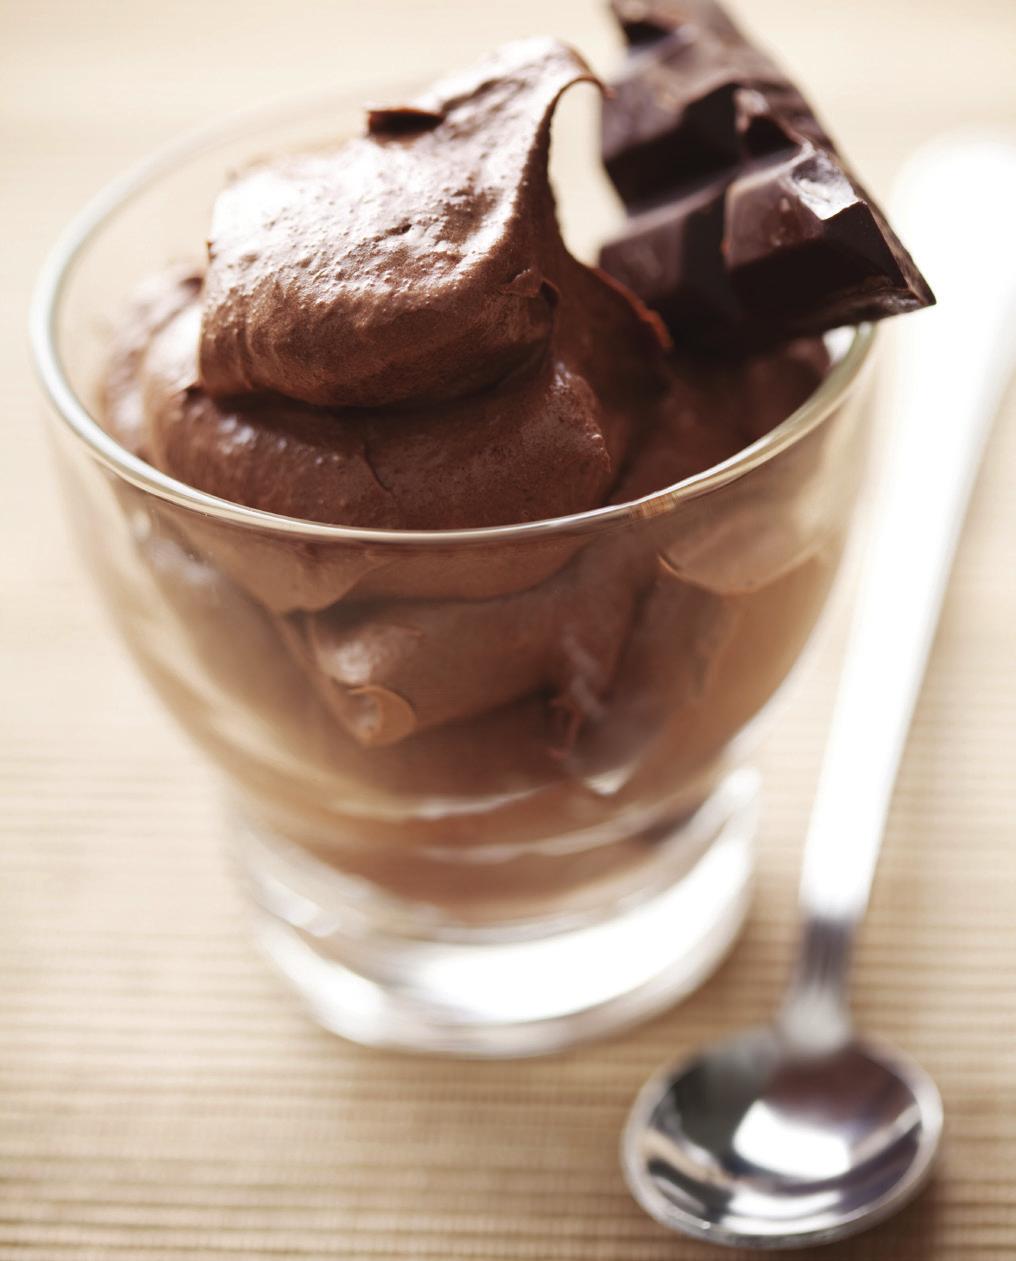 TRY IT OUT! CHOCOLATE MOUSSE WITH AVOCADO SESTAVINE 3 ripe avocados 1 cup cocoa powder ½ cup honey 2 teaspoons vanilla sugar METHOD 1. Add all ingredients to a mixing bowl.